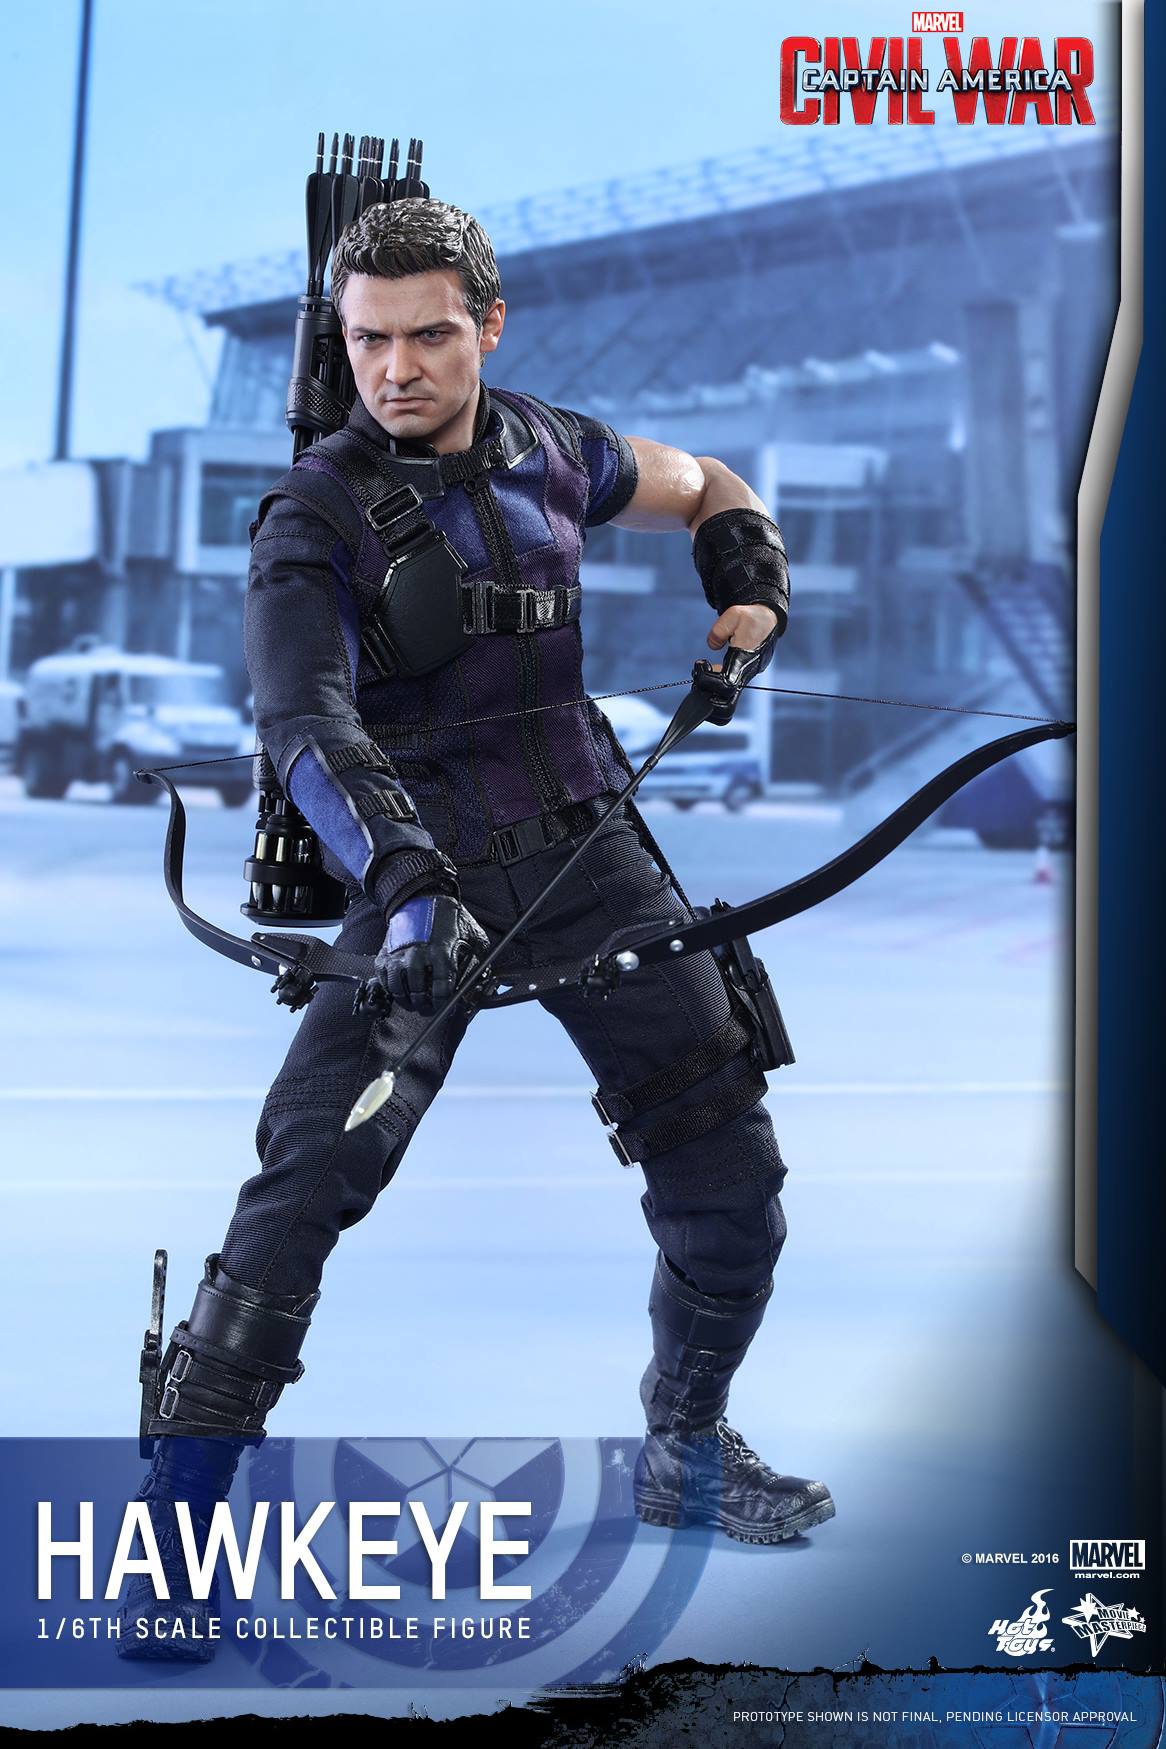 Hot Toys’ New Ant-Man Figure Comes With A Giant Hawkeye